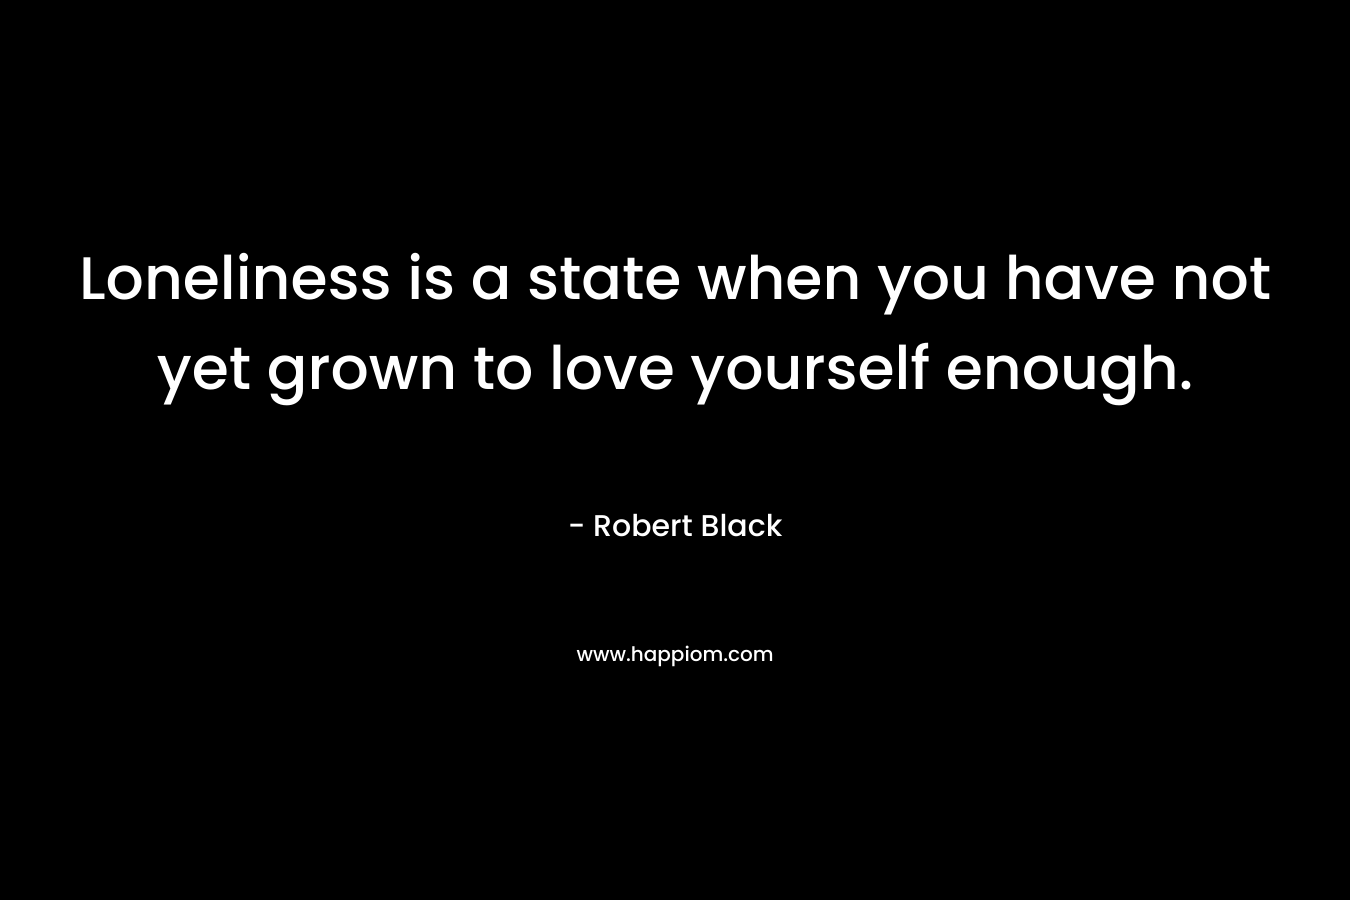 Loneliness is a state when you have not yet grown to love yourself enough.